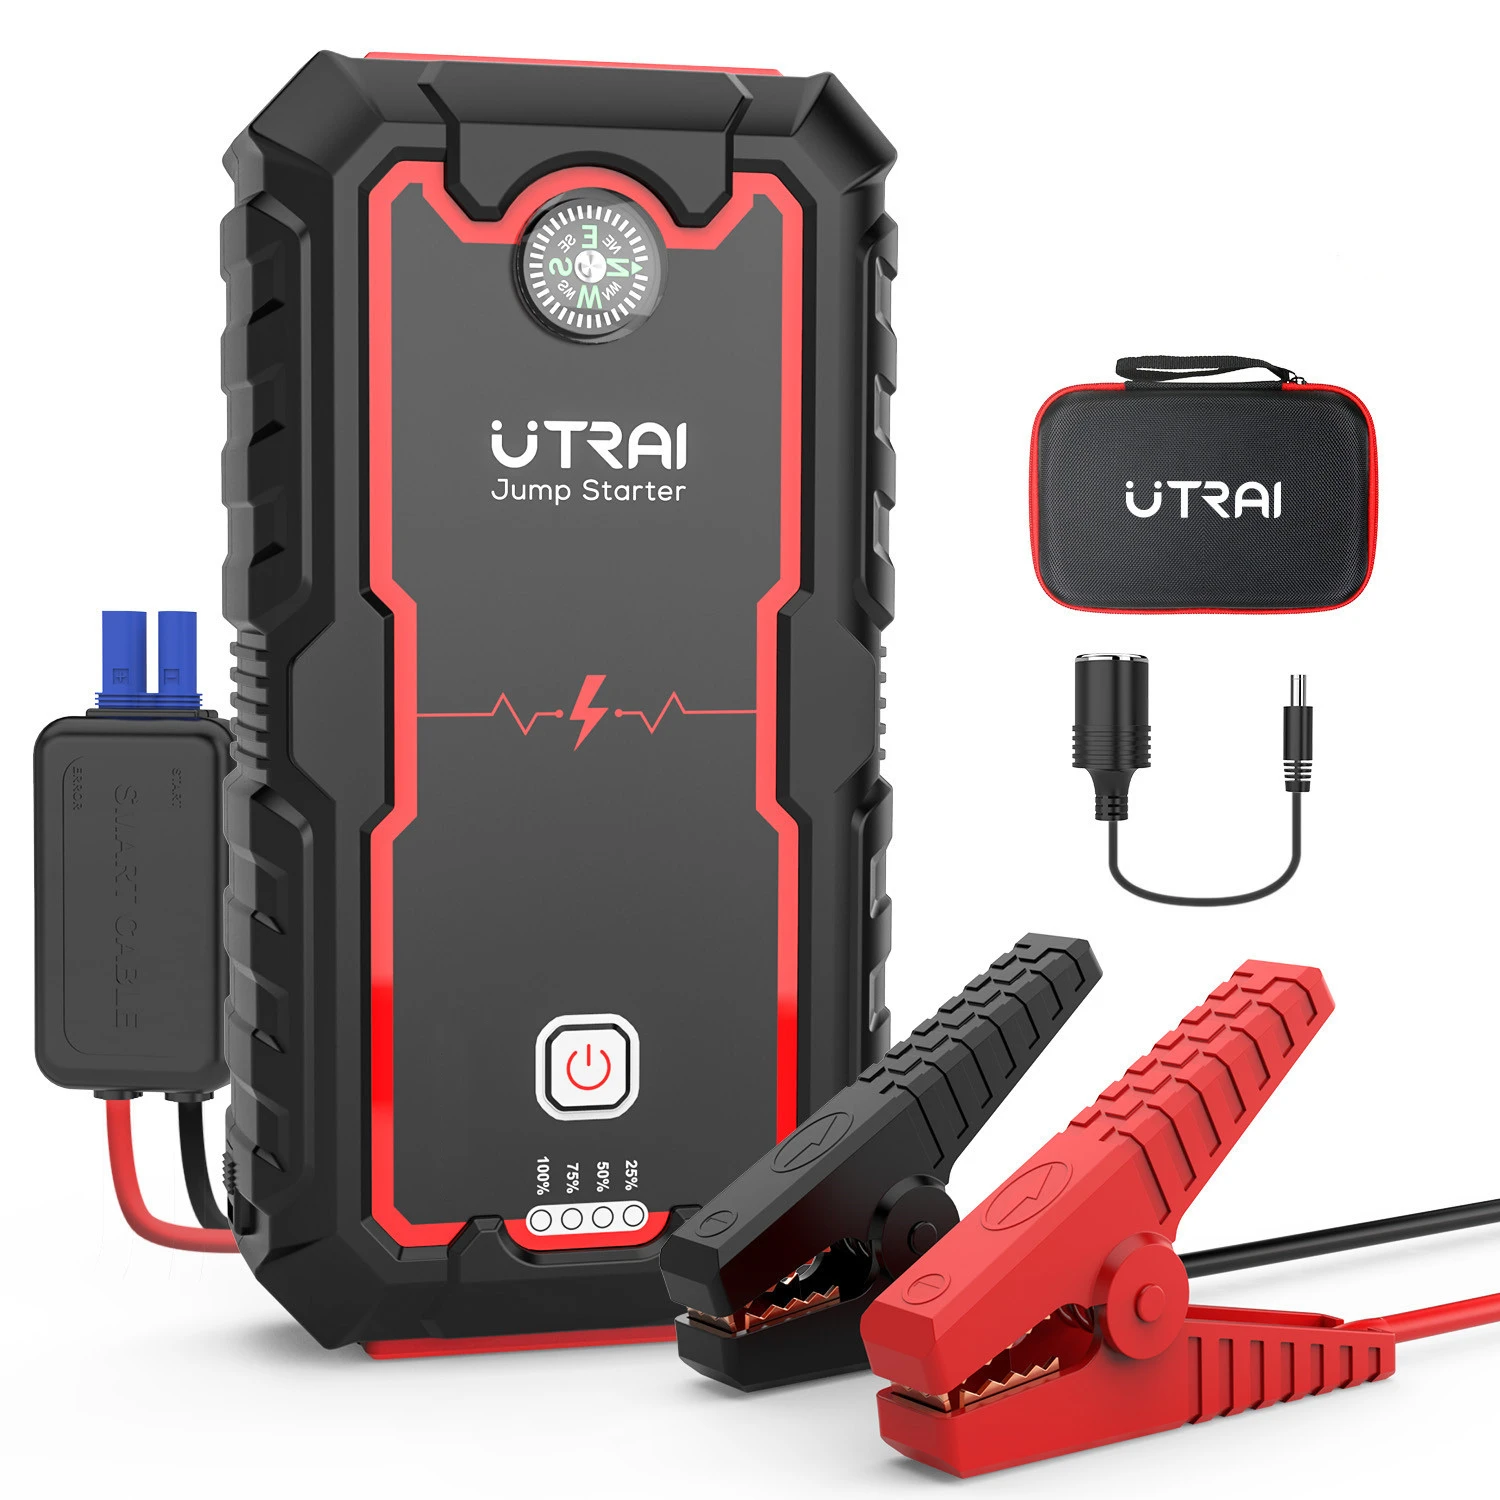 UTRAI Car Jump Starter up to 8L Gas or 6.5L Diesel Engine DC Output for Car Device and LED Flashlight 2000A Peak 24000mah Portable Car Battery Charger Phone Charger with Dual USB Ports 